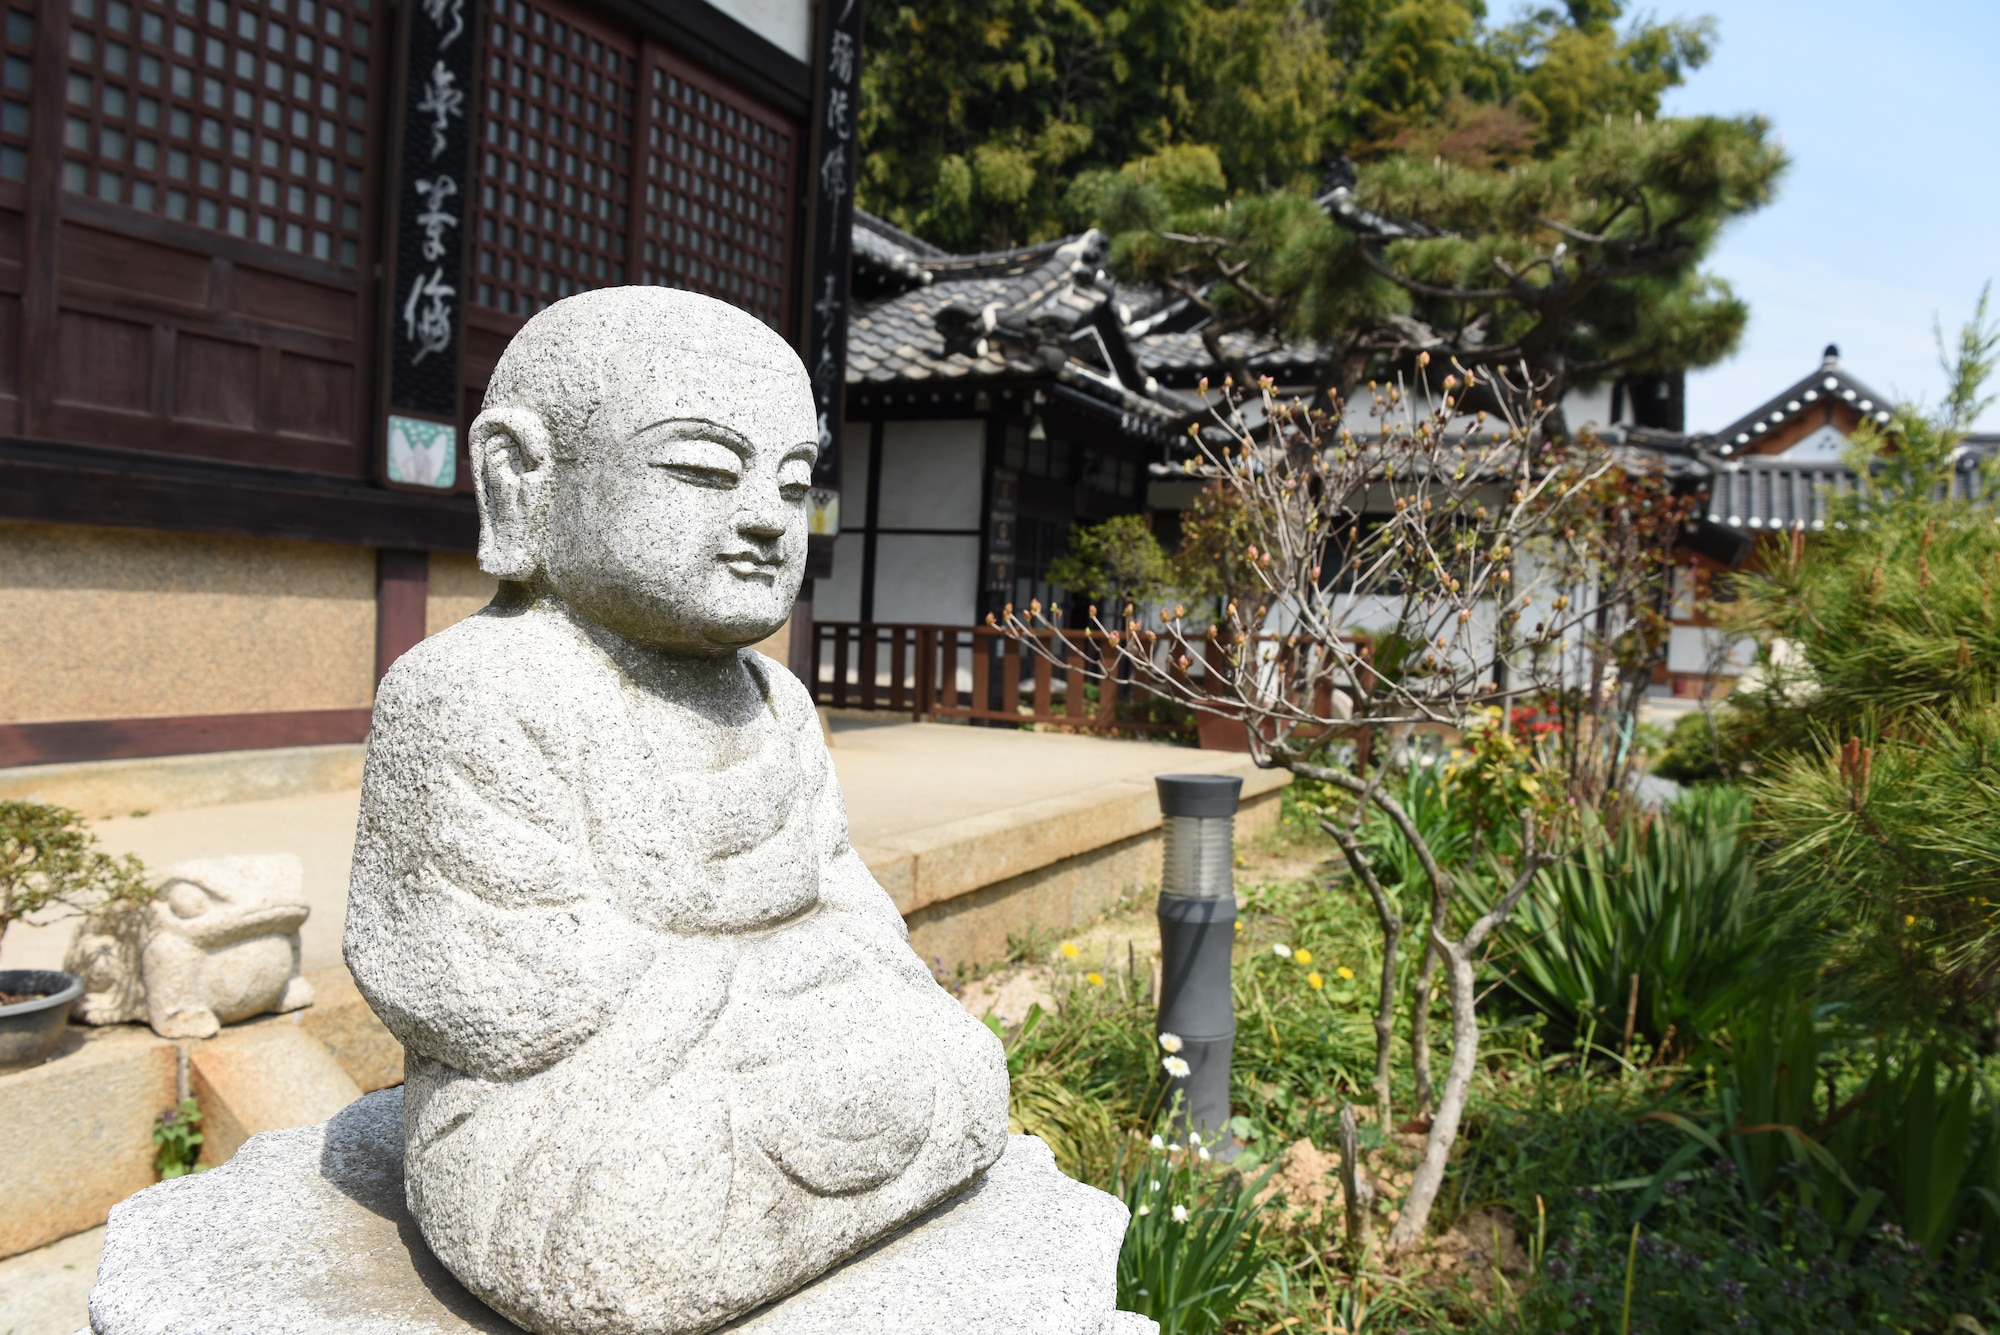 A Buddha statue rests on a pillar outside of Daeungjeon Hall of Dongguksa Temple in Gunsan City, Republic of Korea, April 13, 2019. The Dongguksa Temple was built as a temple of the Soto sect of Japanese Buddhism. (U.S. Air Force photo by Staff Sgt. Joshua Edwards)